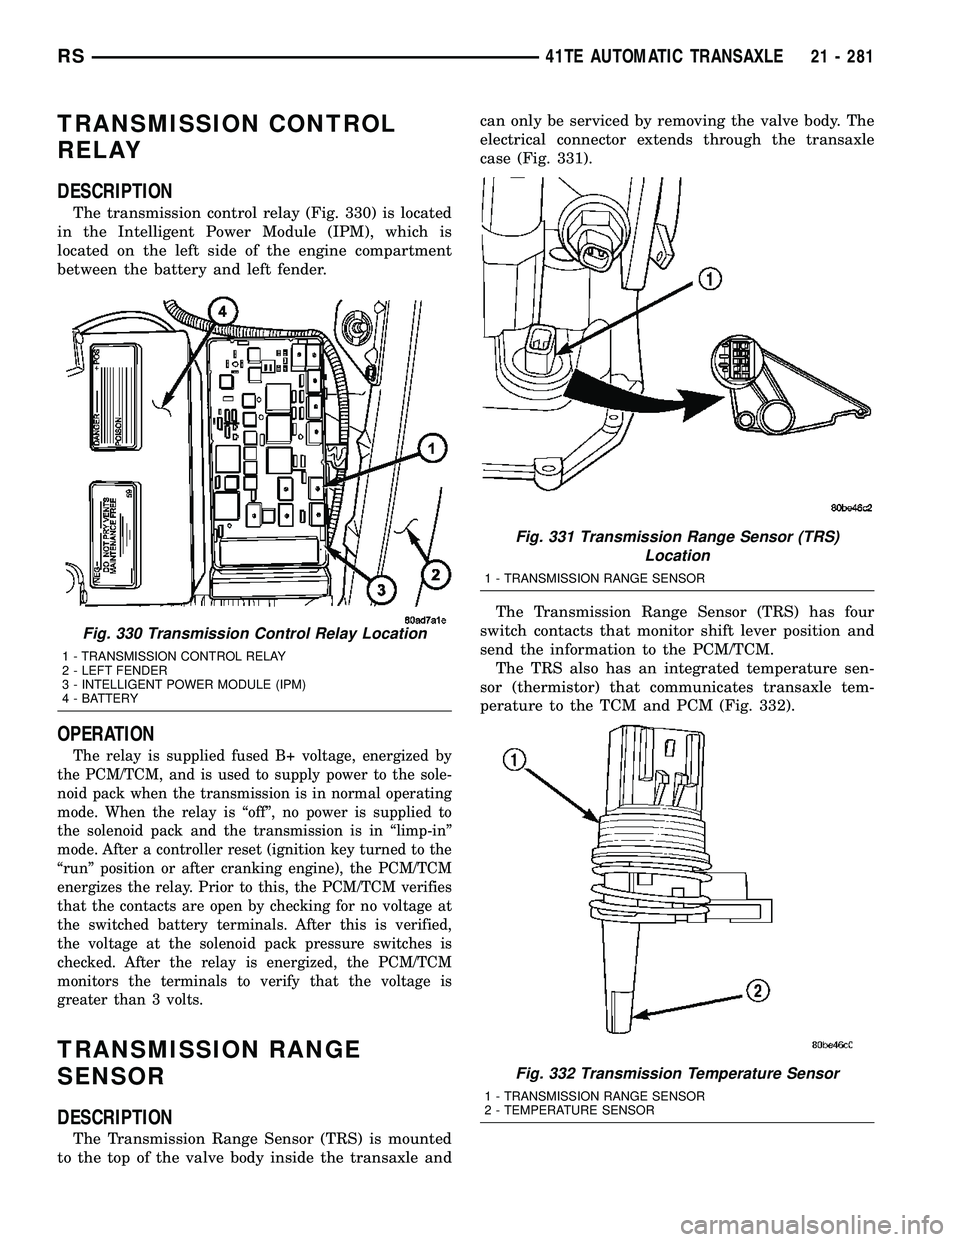 CHRYSLER VOYAGER 2005  Service Manual TRANSMISSION CONTROL
RELAY
DESCRIPTION
The transmission control relay (Fig. 330) is located
in the Intelligent Power Module (IPM), which is
located on the left side of the engine compartment
between t